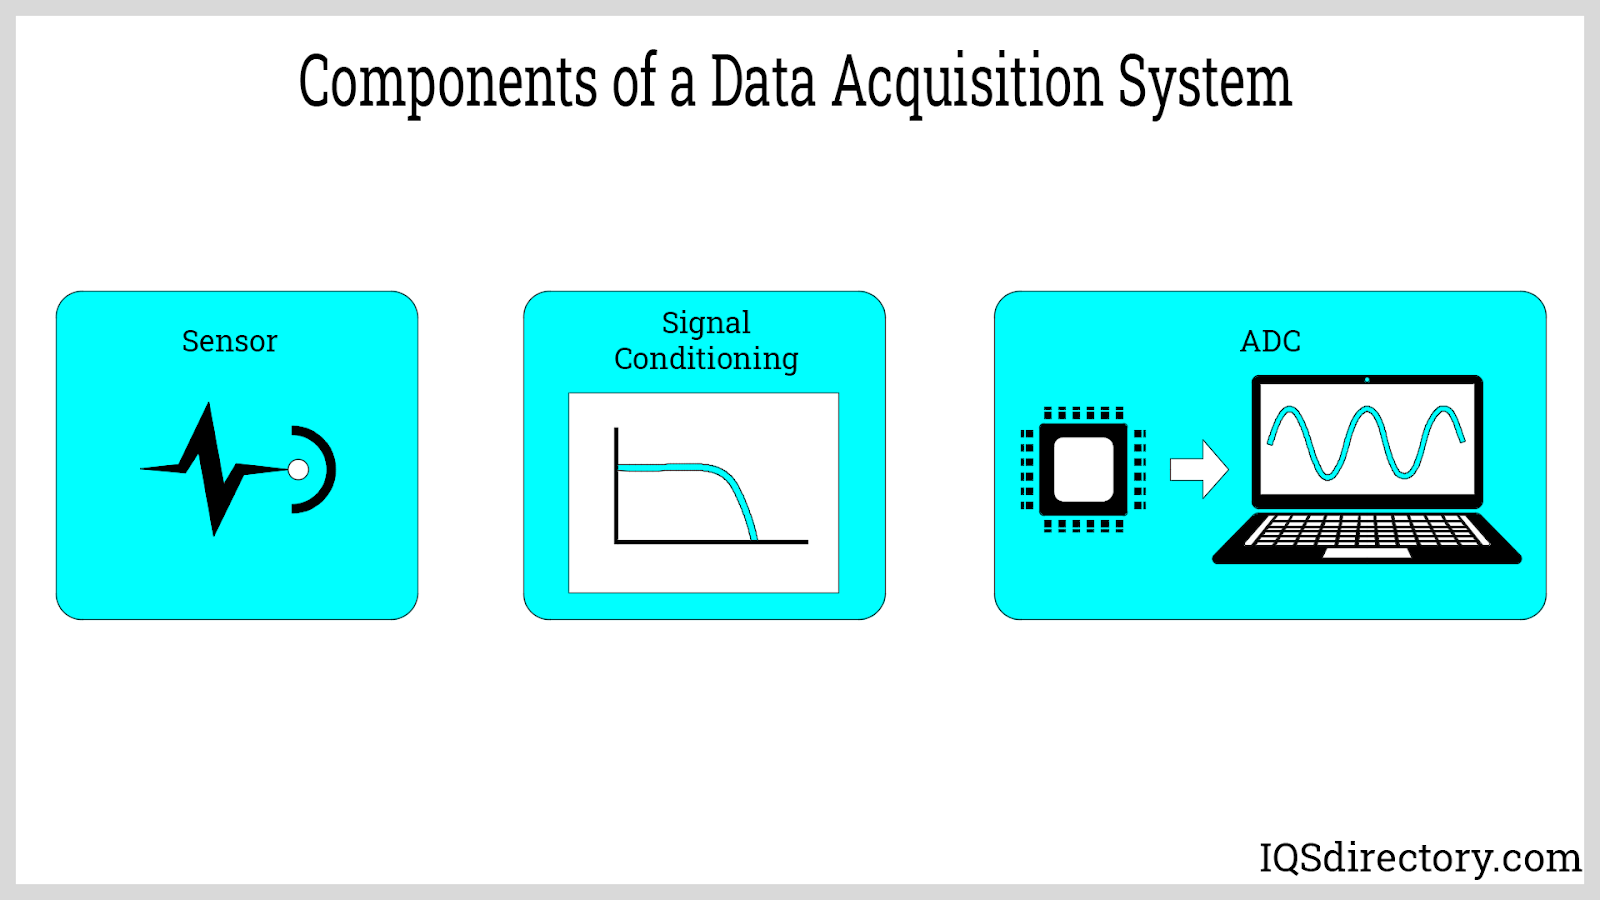 Components of a Data Acquisition System